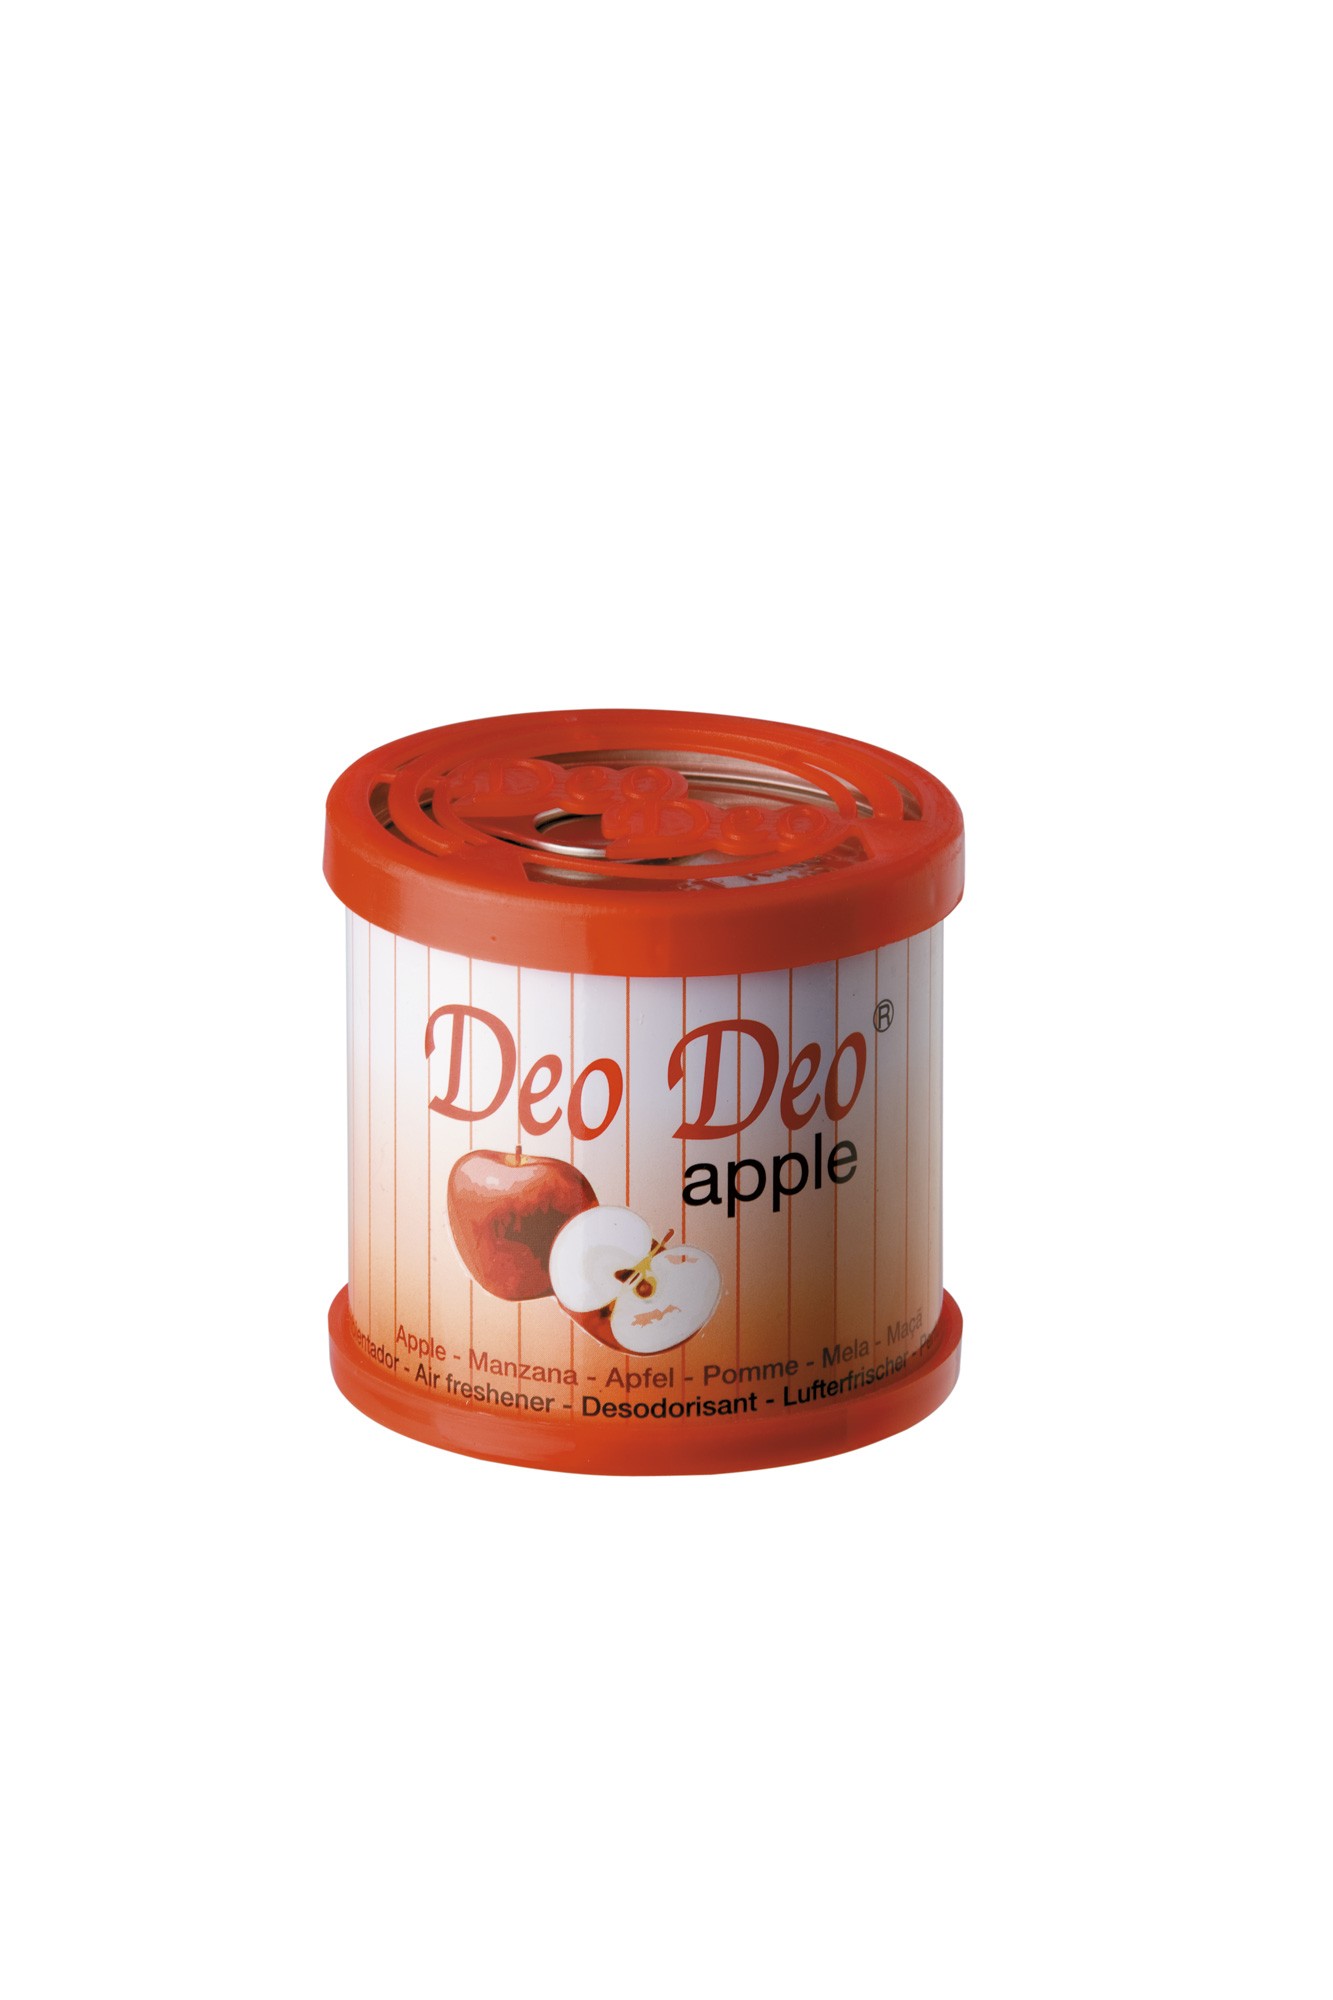 Deo Deo Apple Air Freshener Gel Can Car Home Air Freshener Sweet Smell Scent